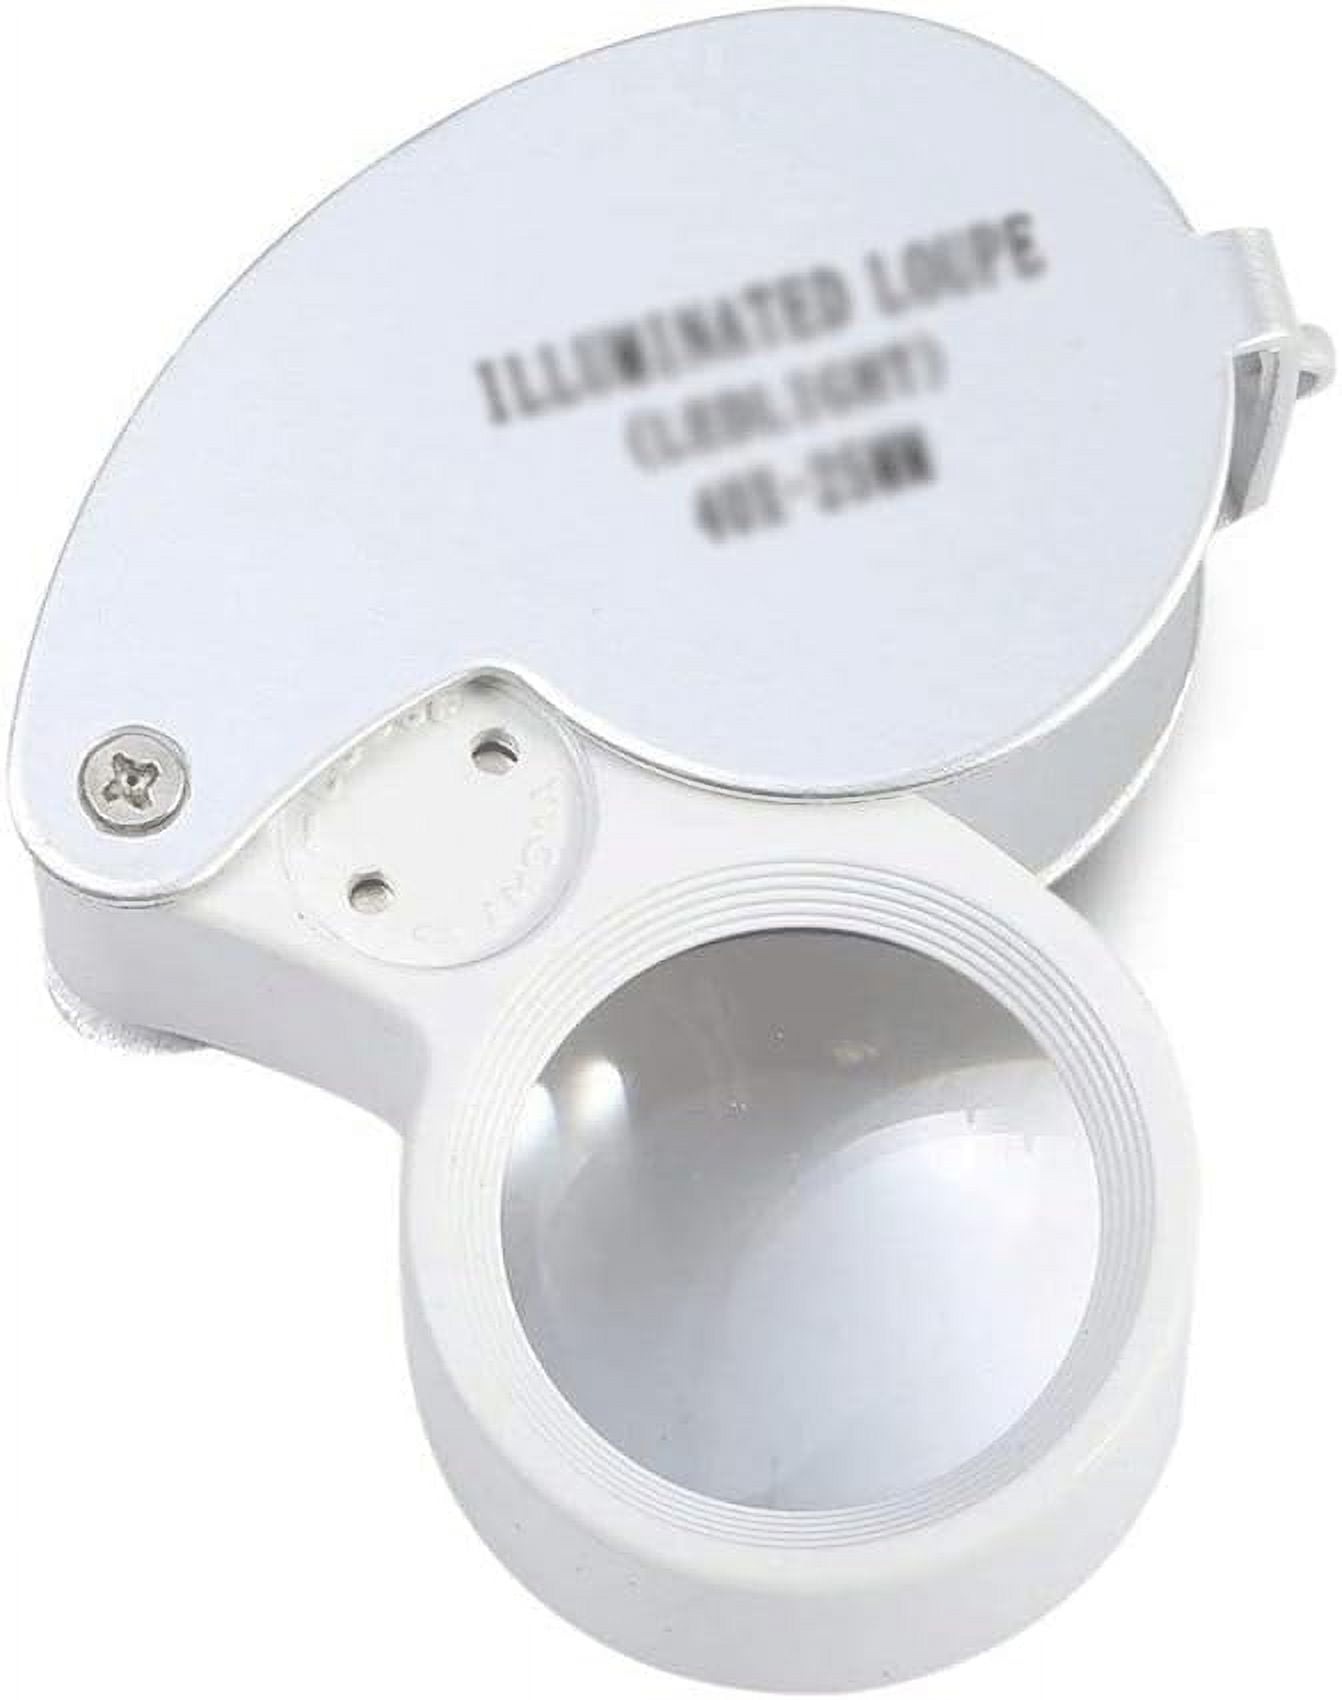 Jewelry Loupe 40X Magnifier with LED Light - Brilliant Promos - Be  Brilliant!